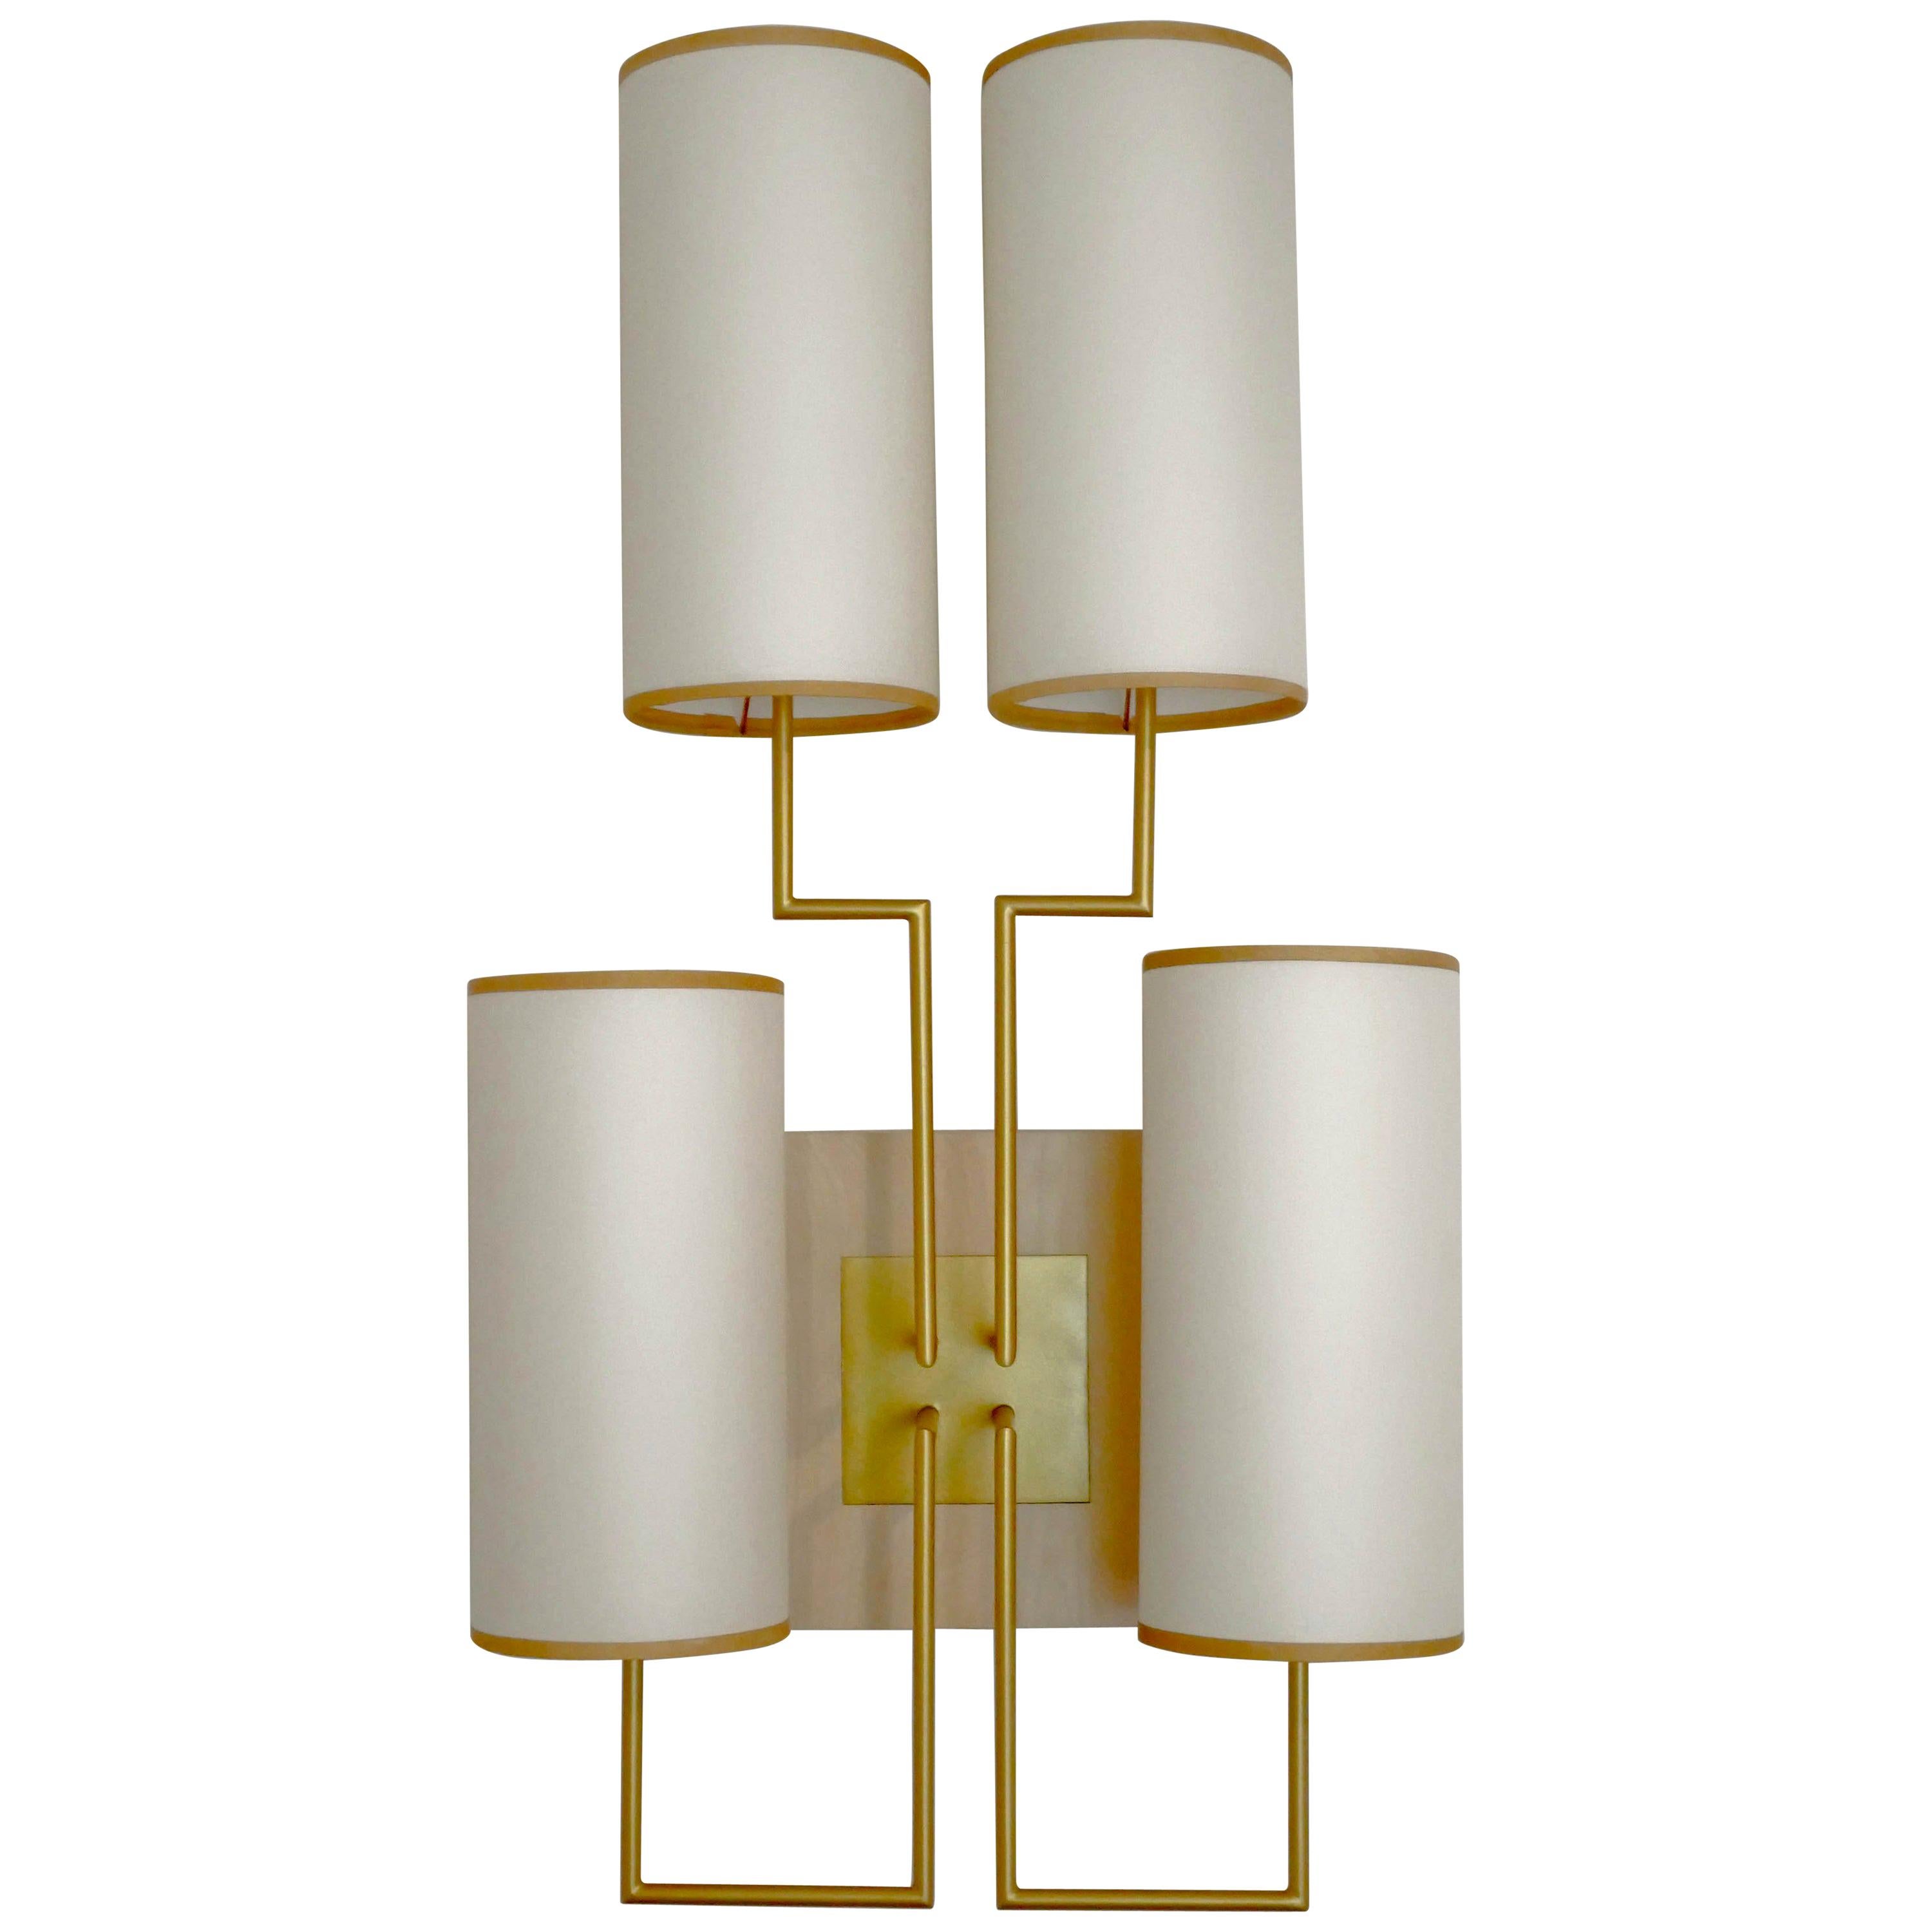 Wall Lamp Sconce in Gold Patina and White Lamp Shades For Sale